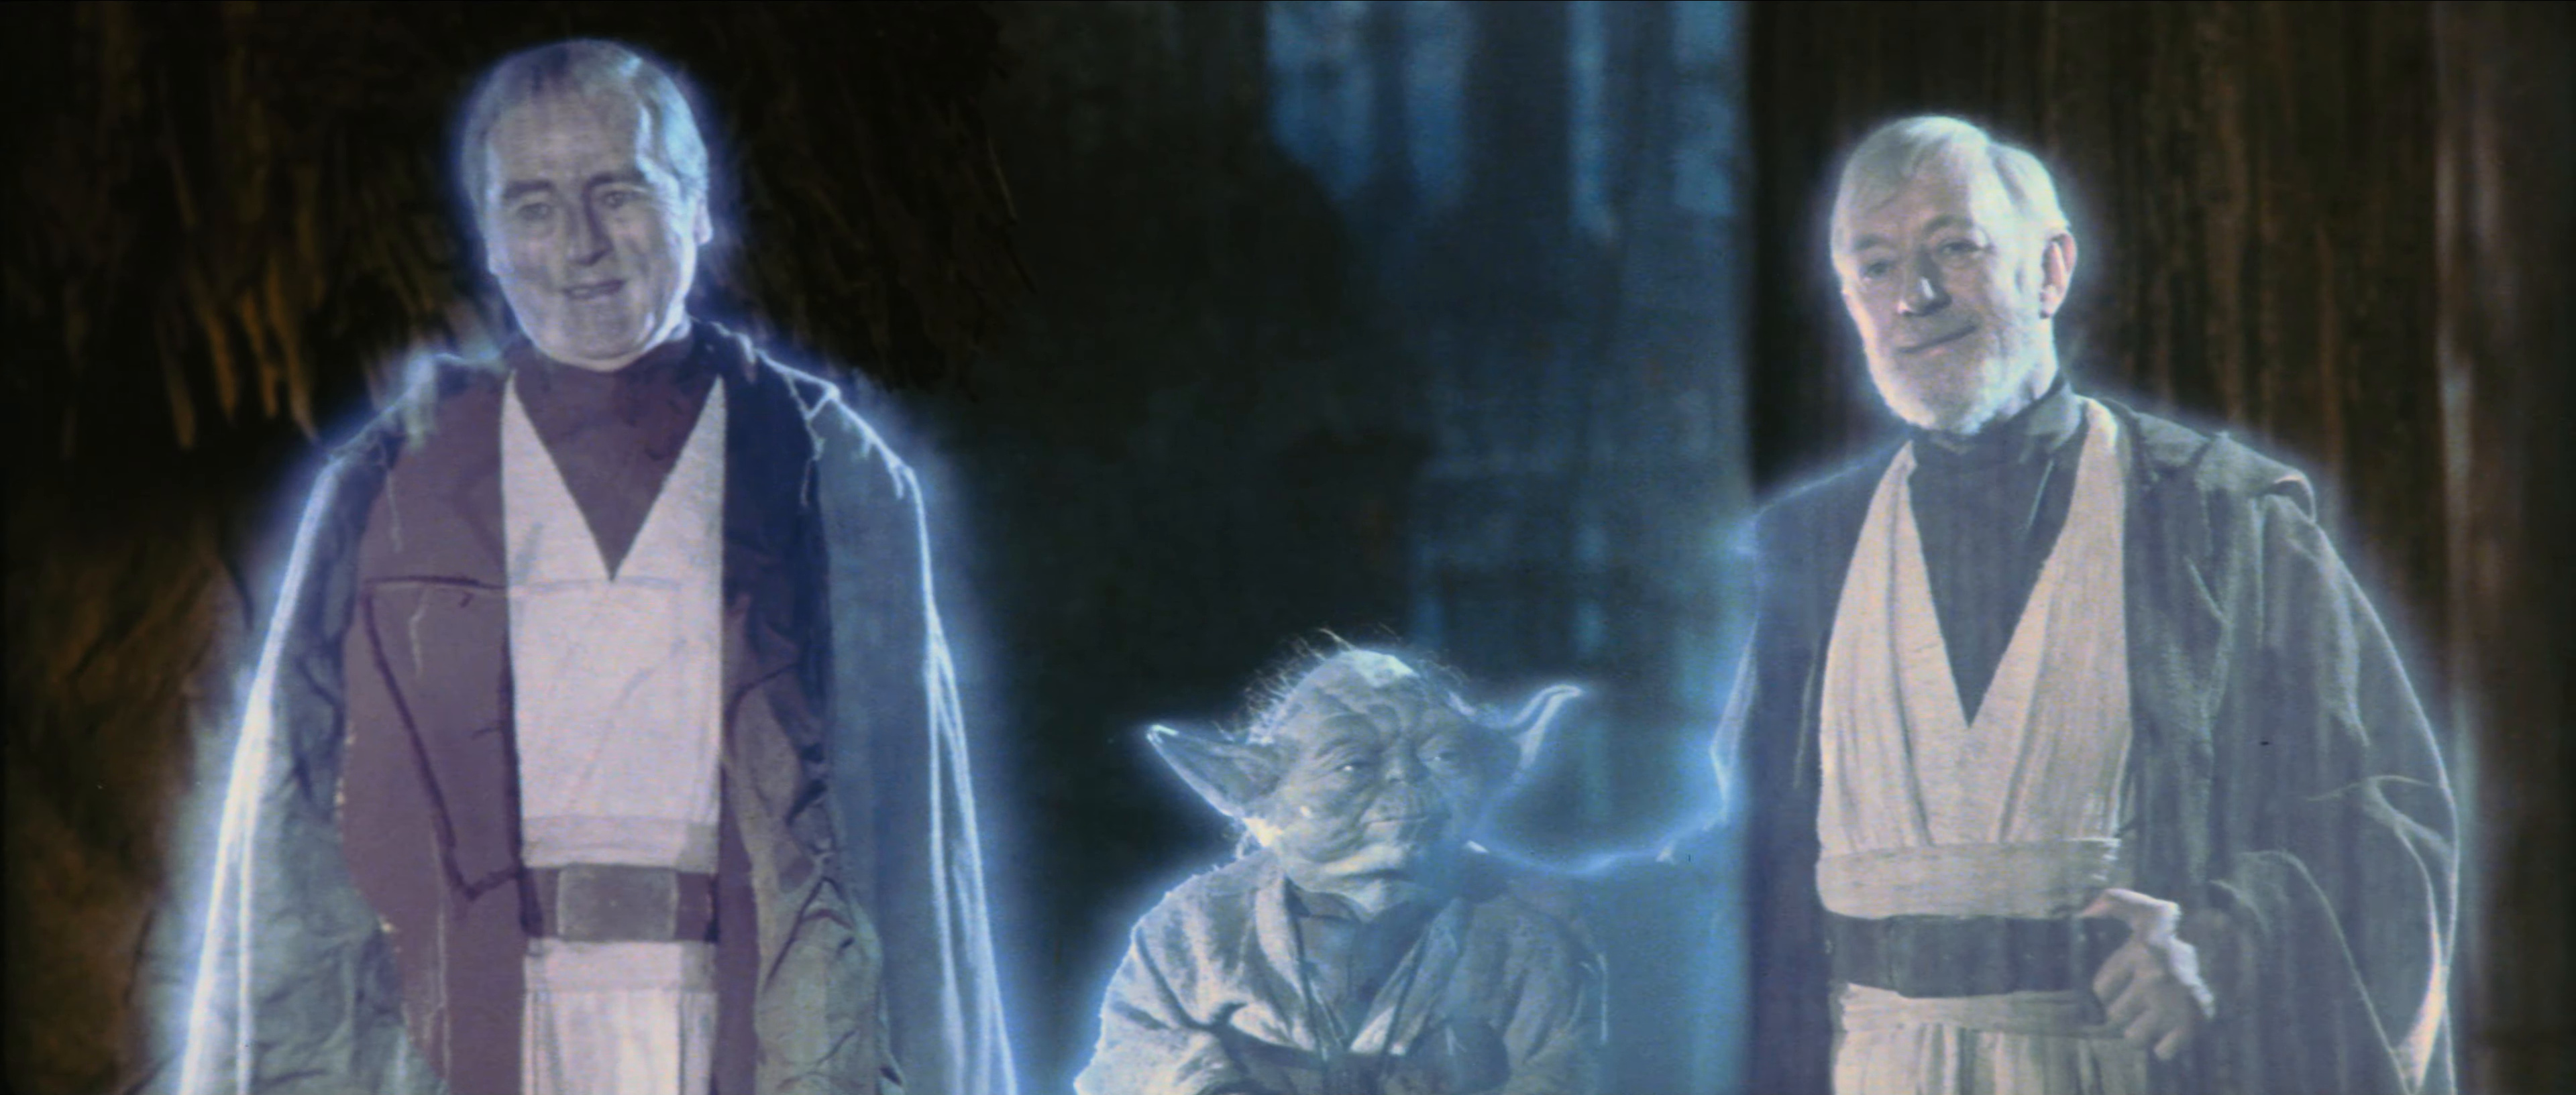 Force Ghosts Of Star Wars Explained